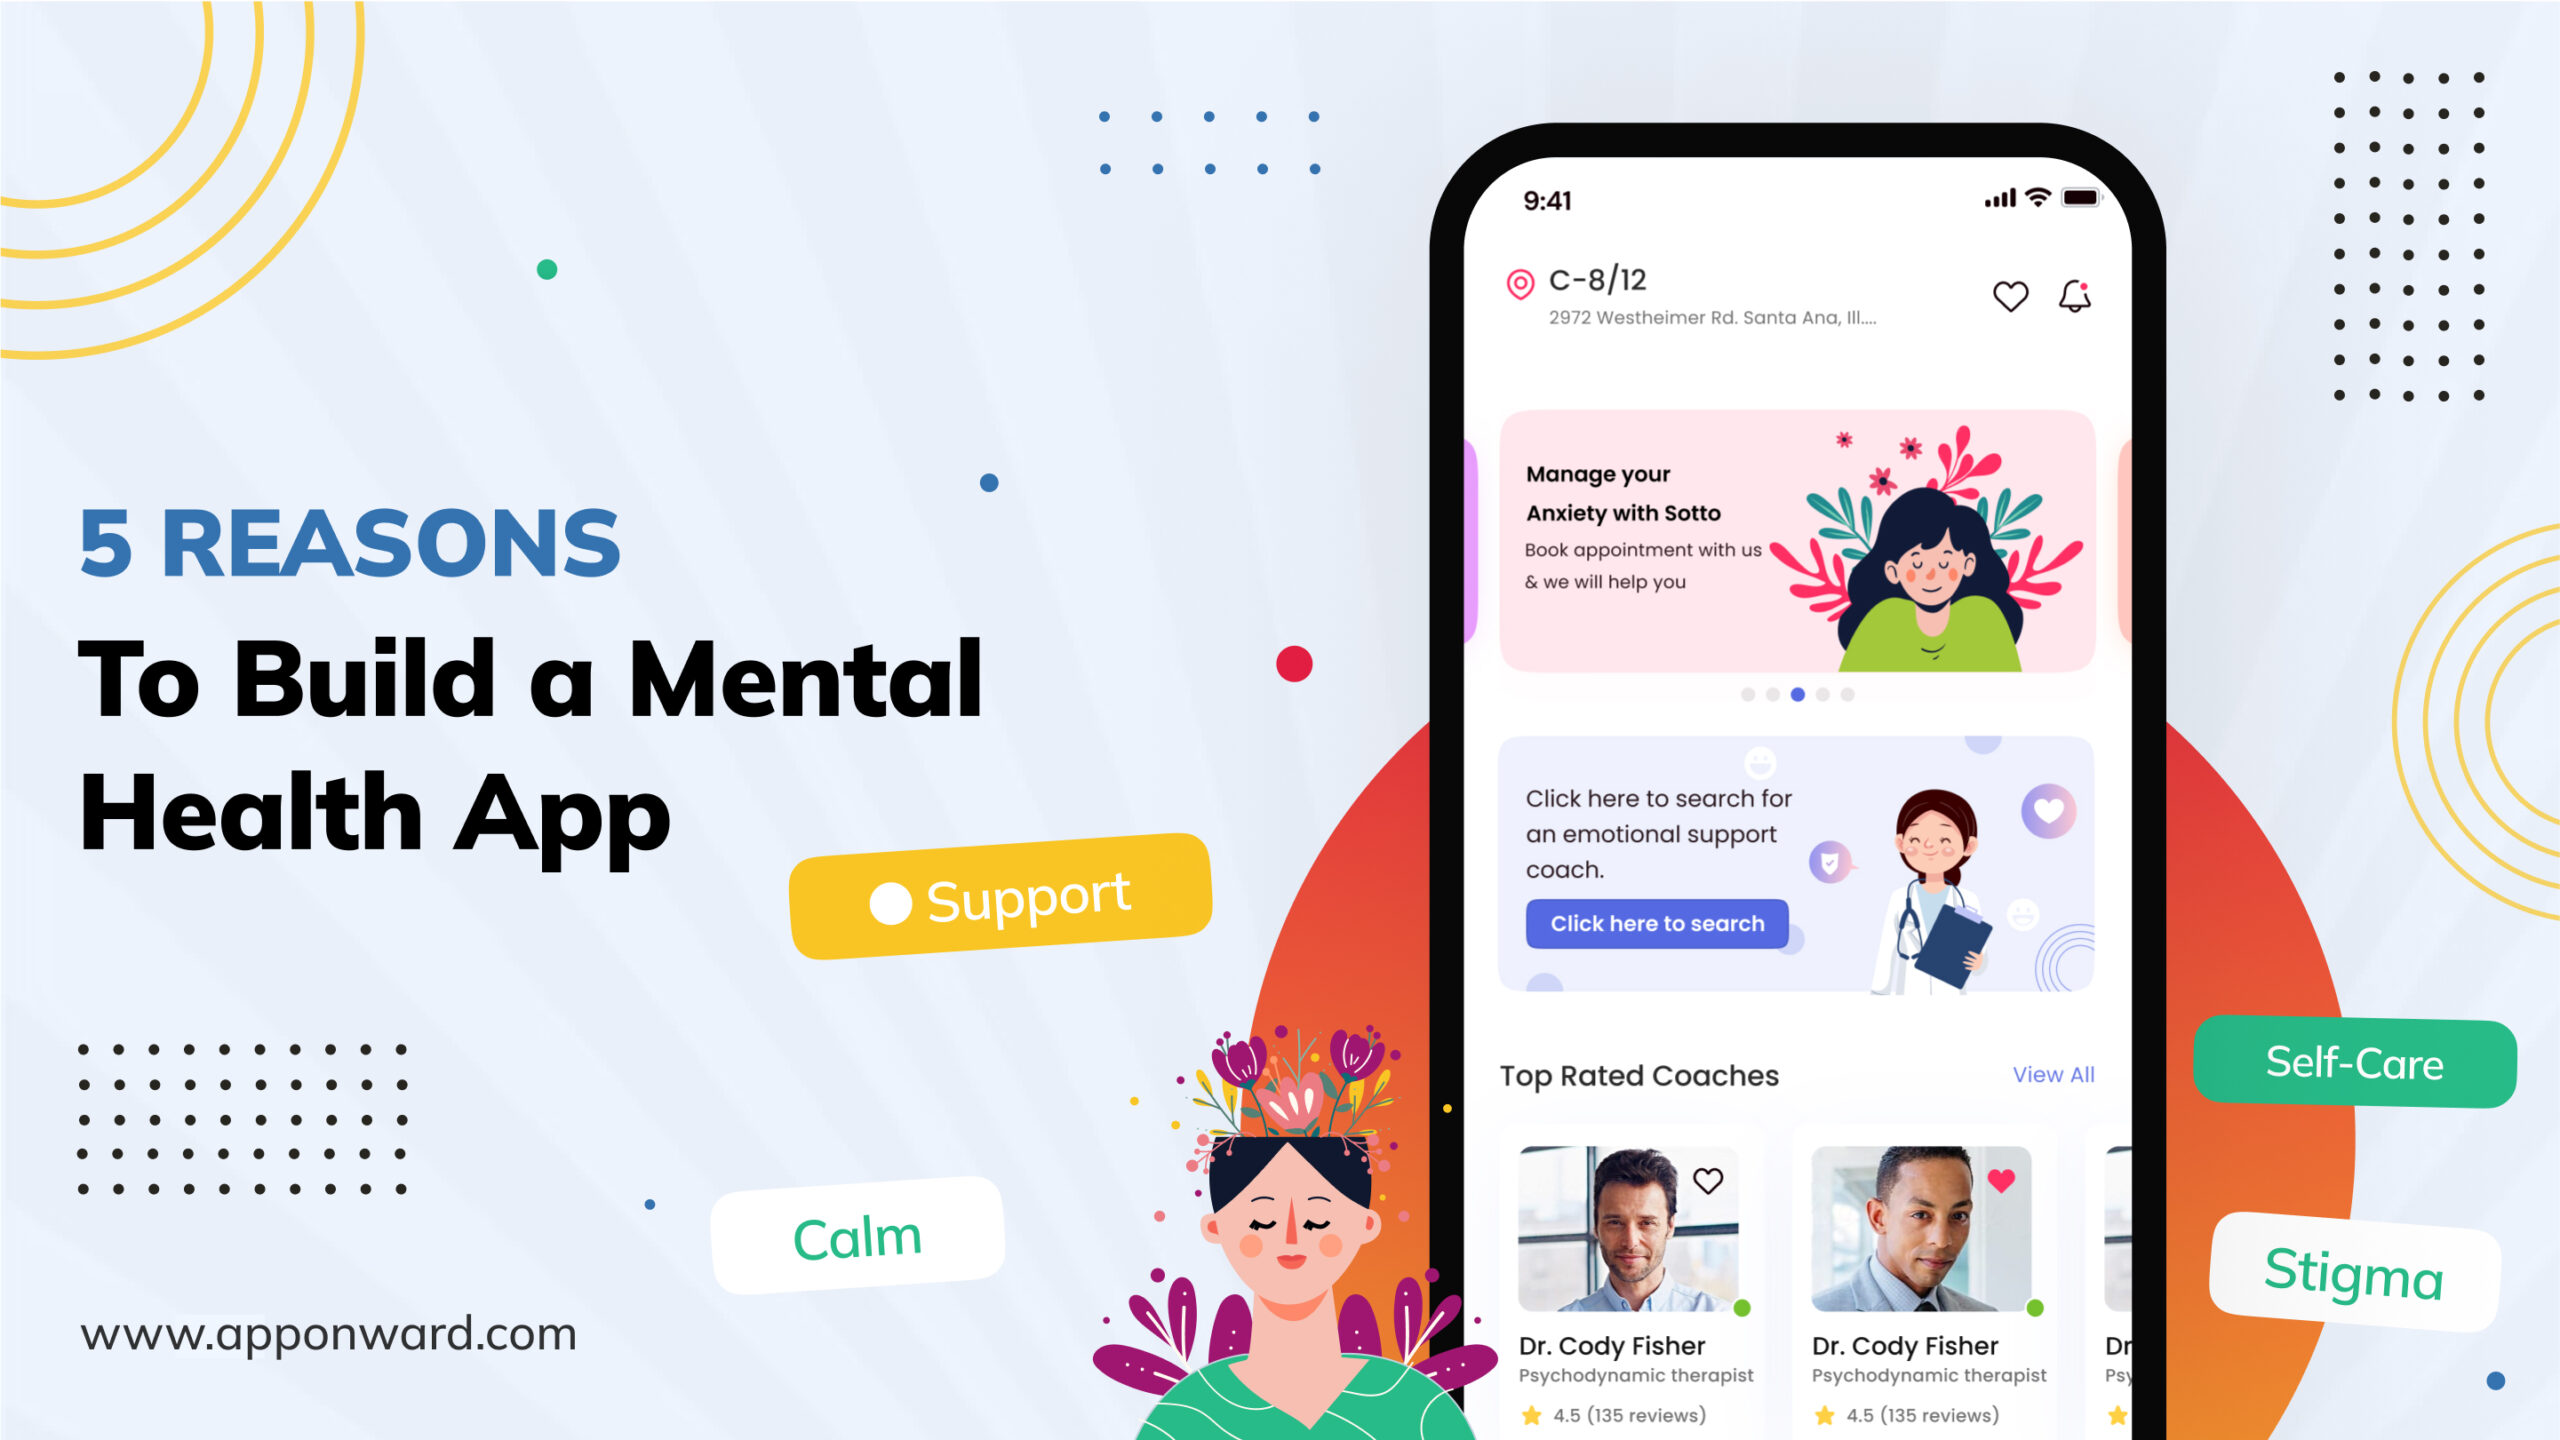 5 Reasons to Build a Mental Health App